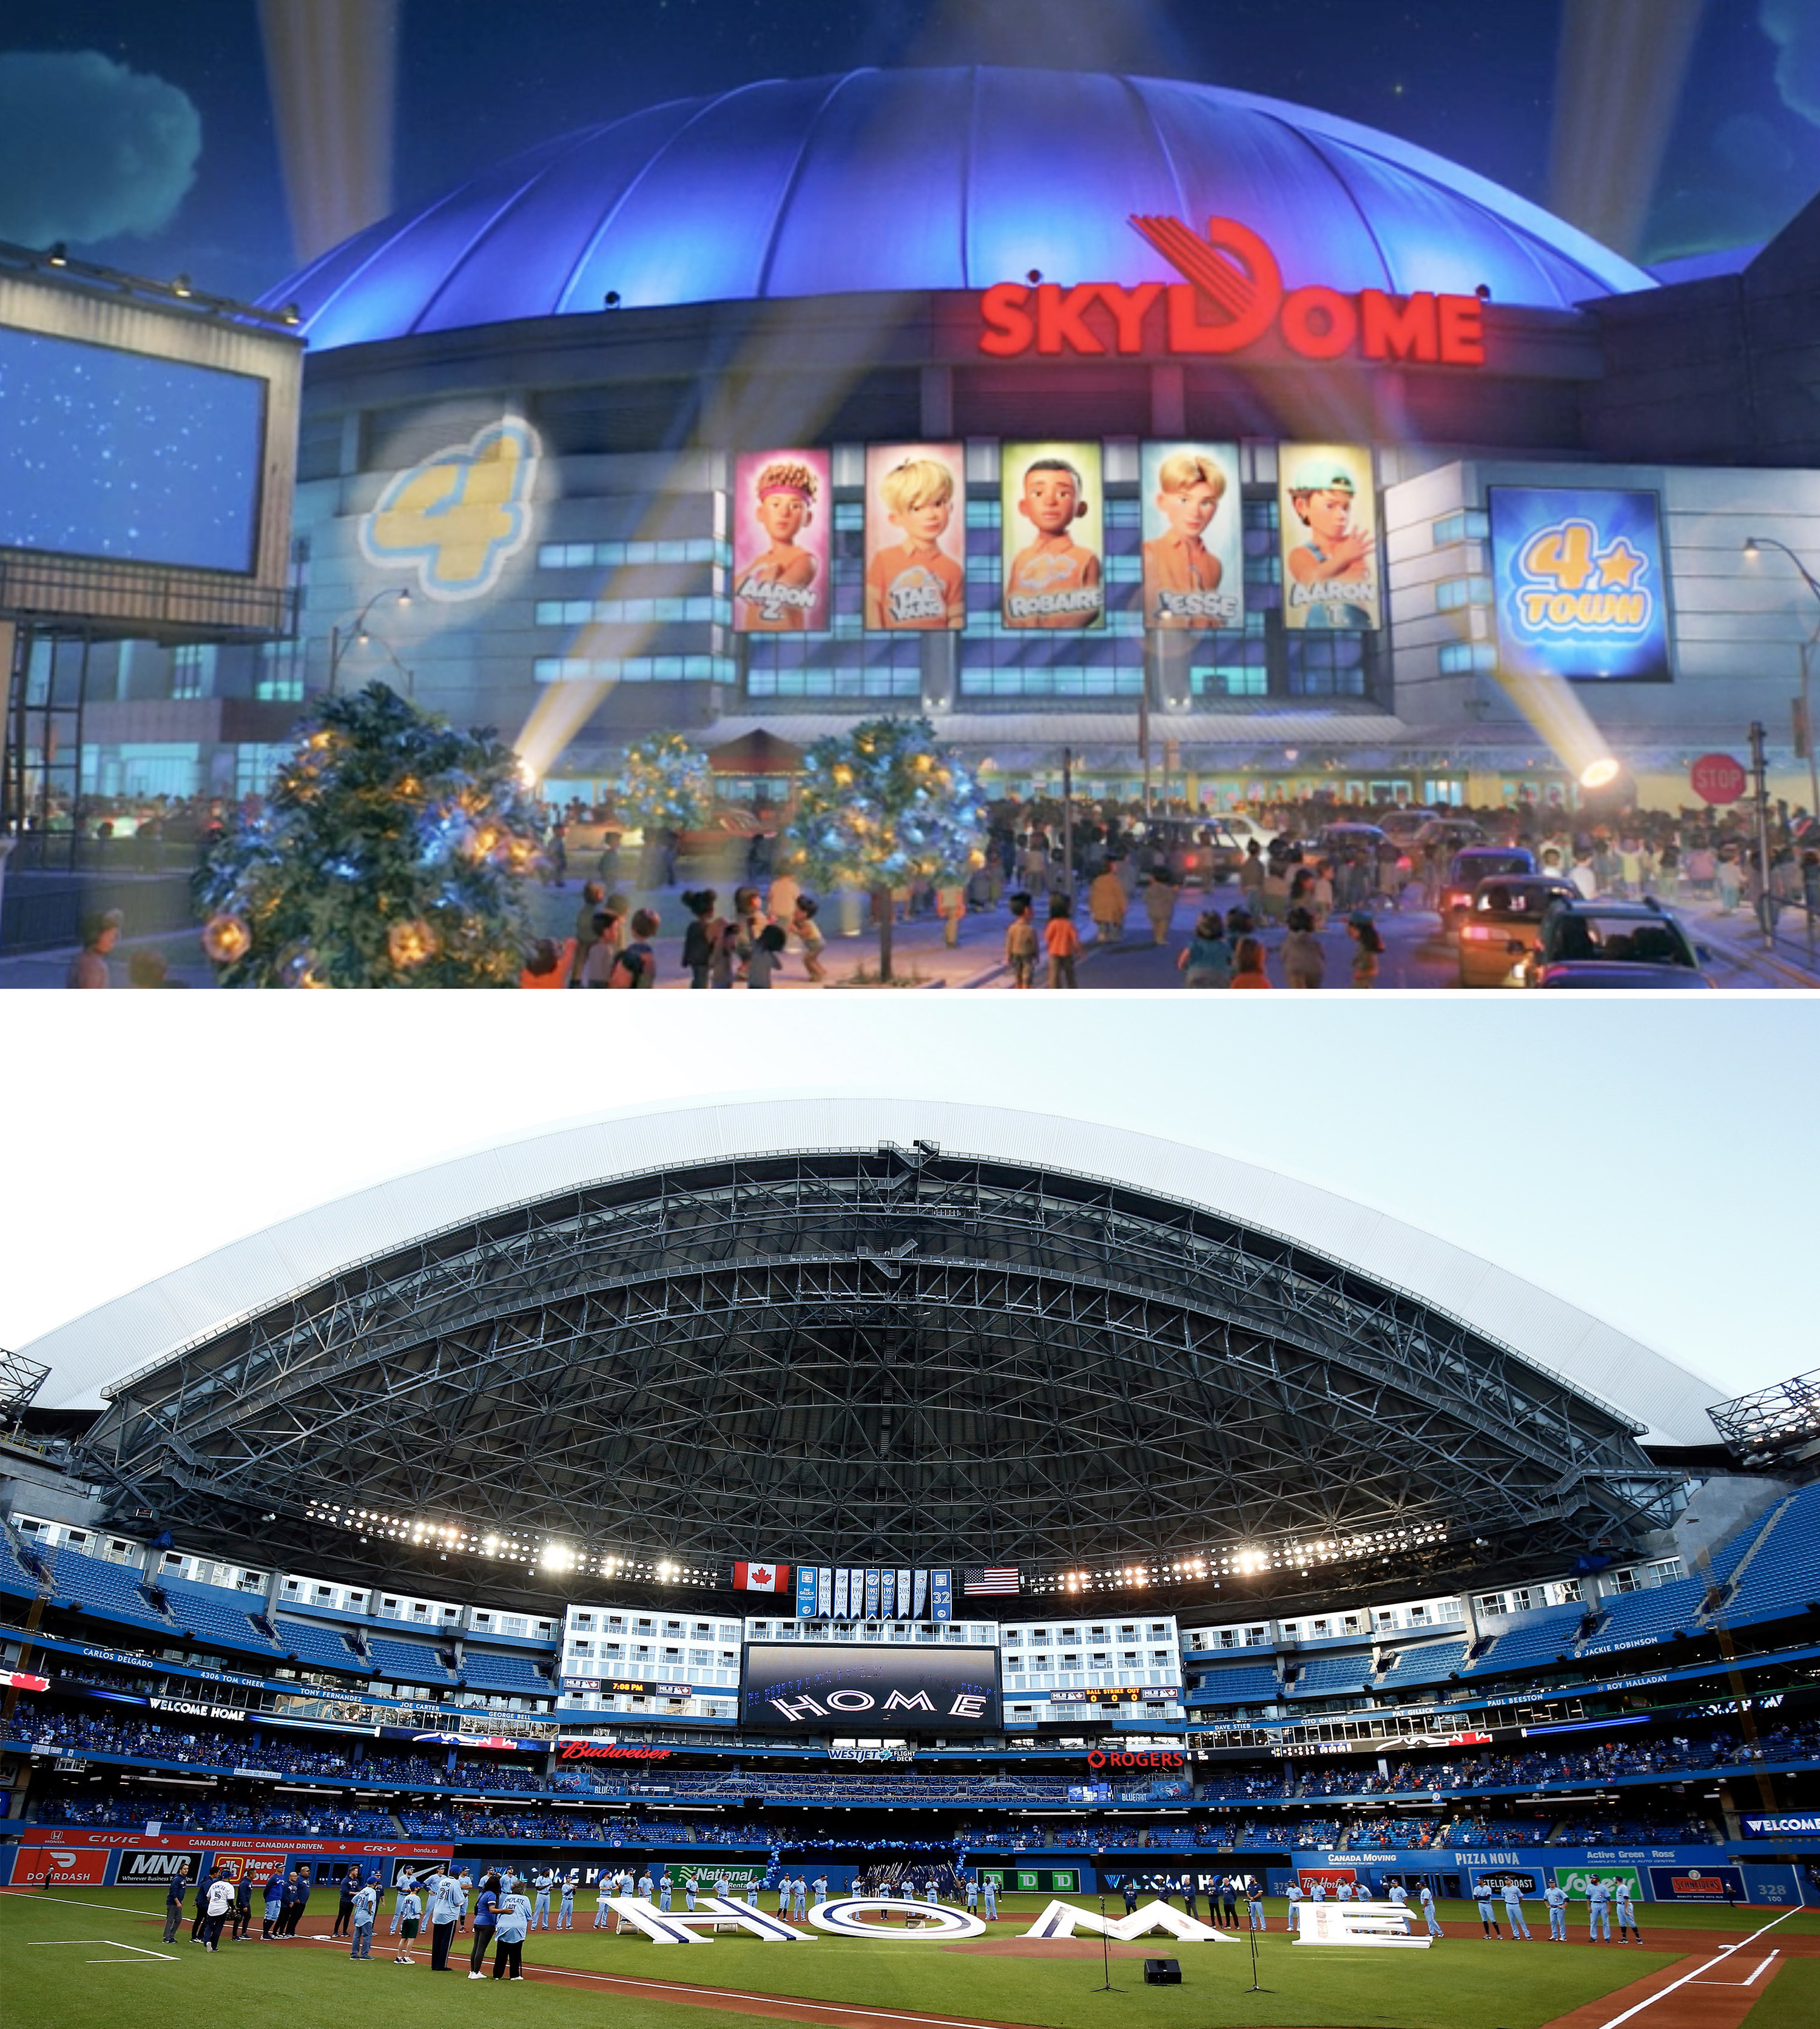 The SkyDome in the movie vs real life